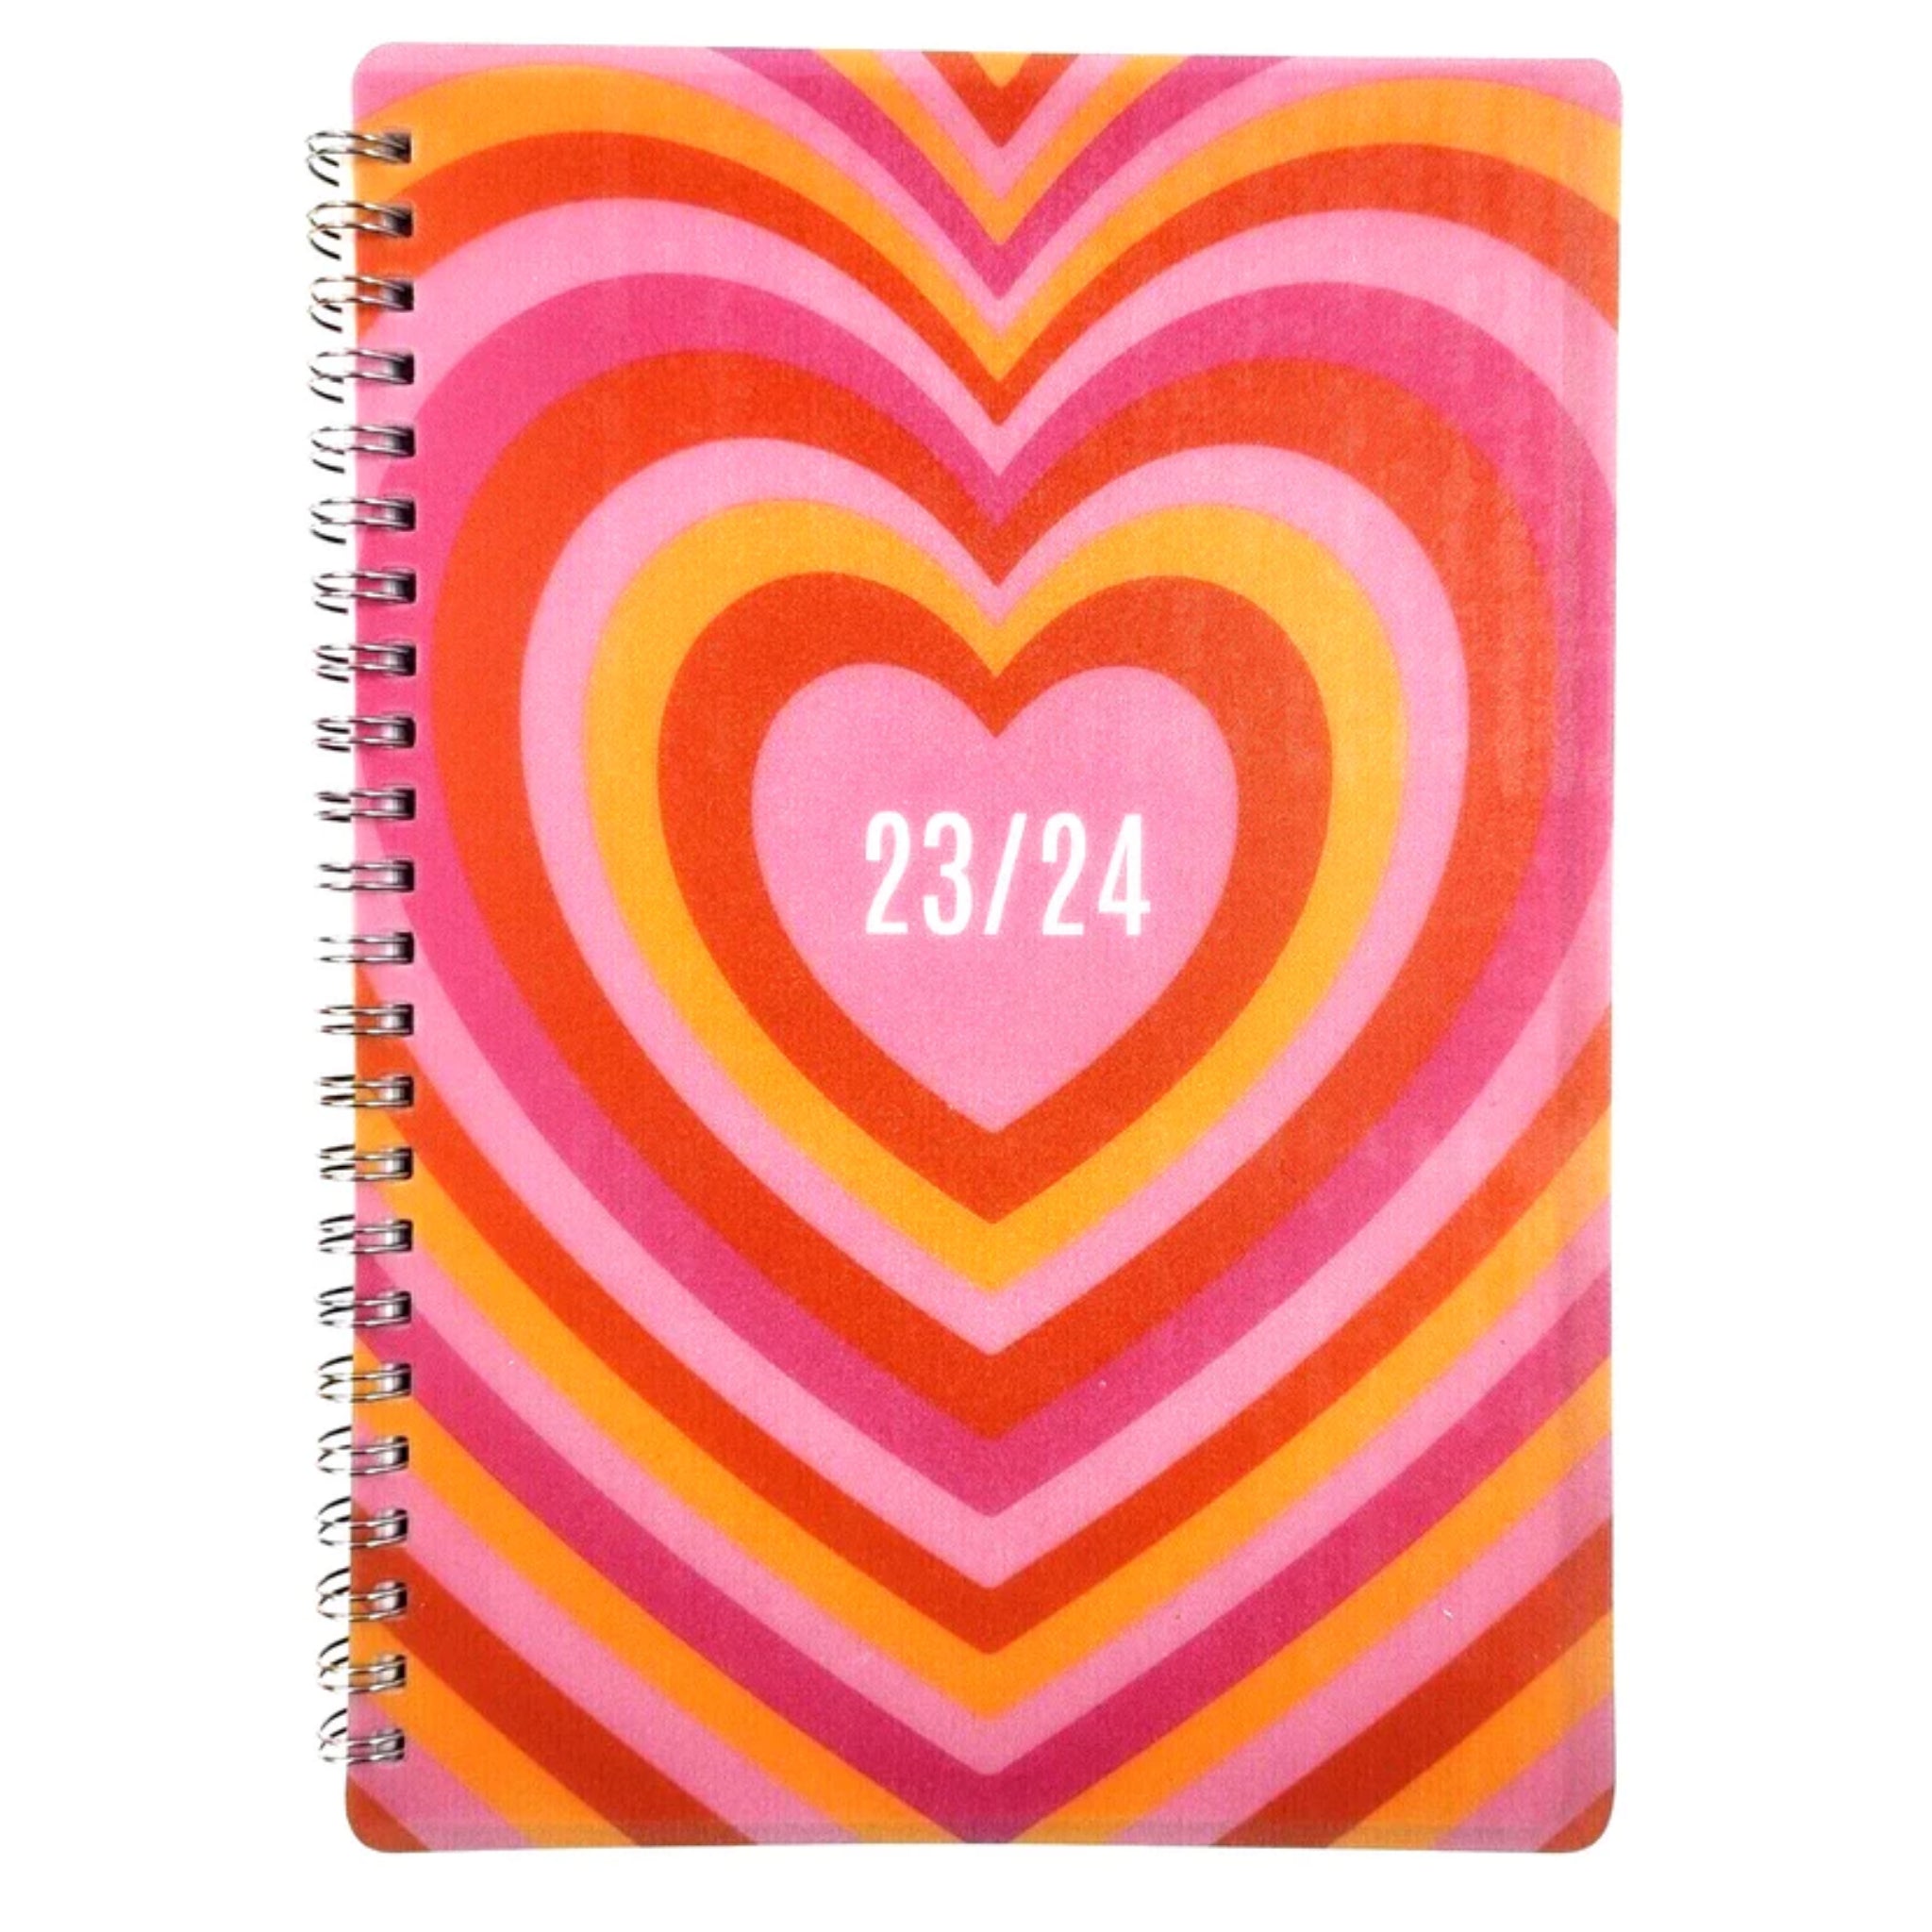 Beclen Harp 2023-2024 Academic A5 Week to View WIRO Hearts Cover Diary School Year Teacher